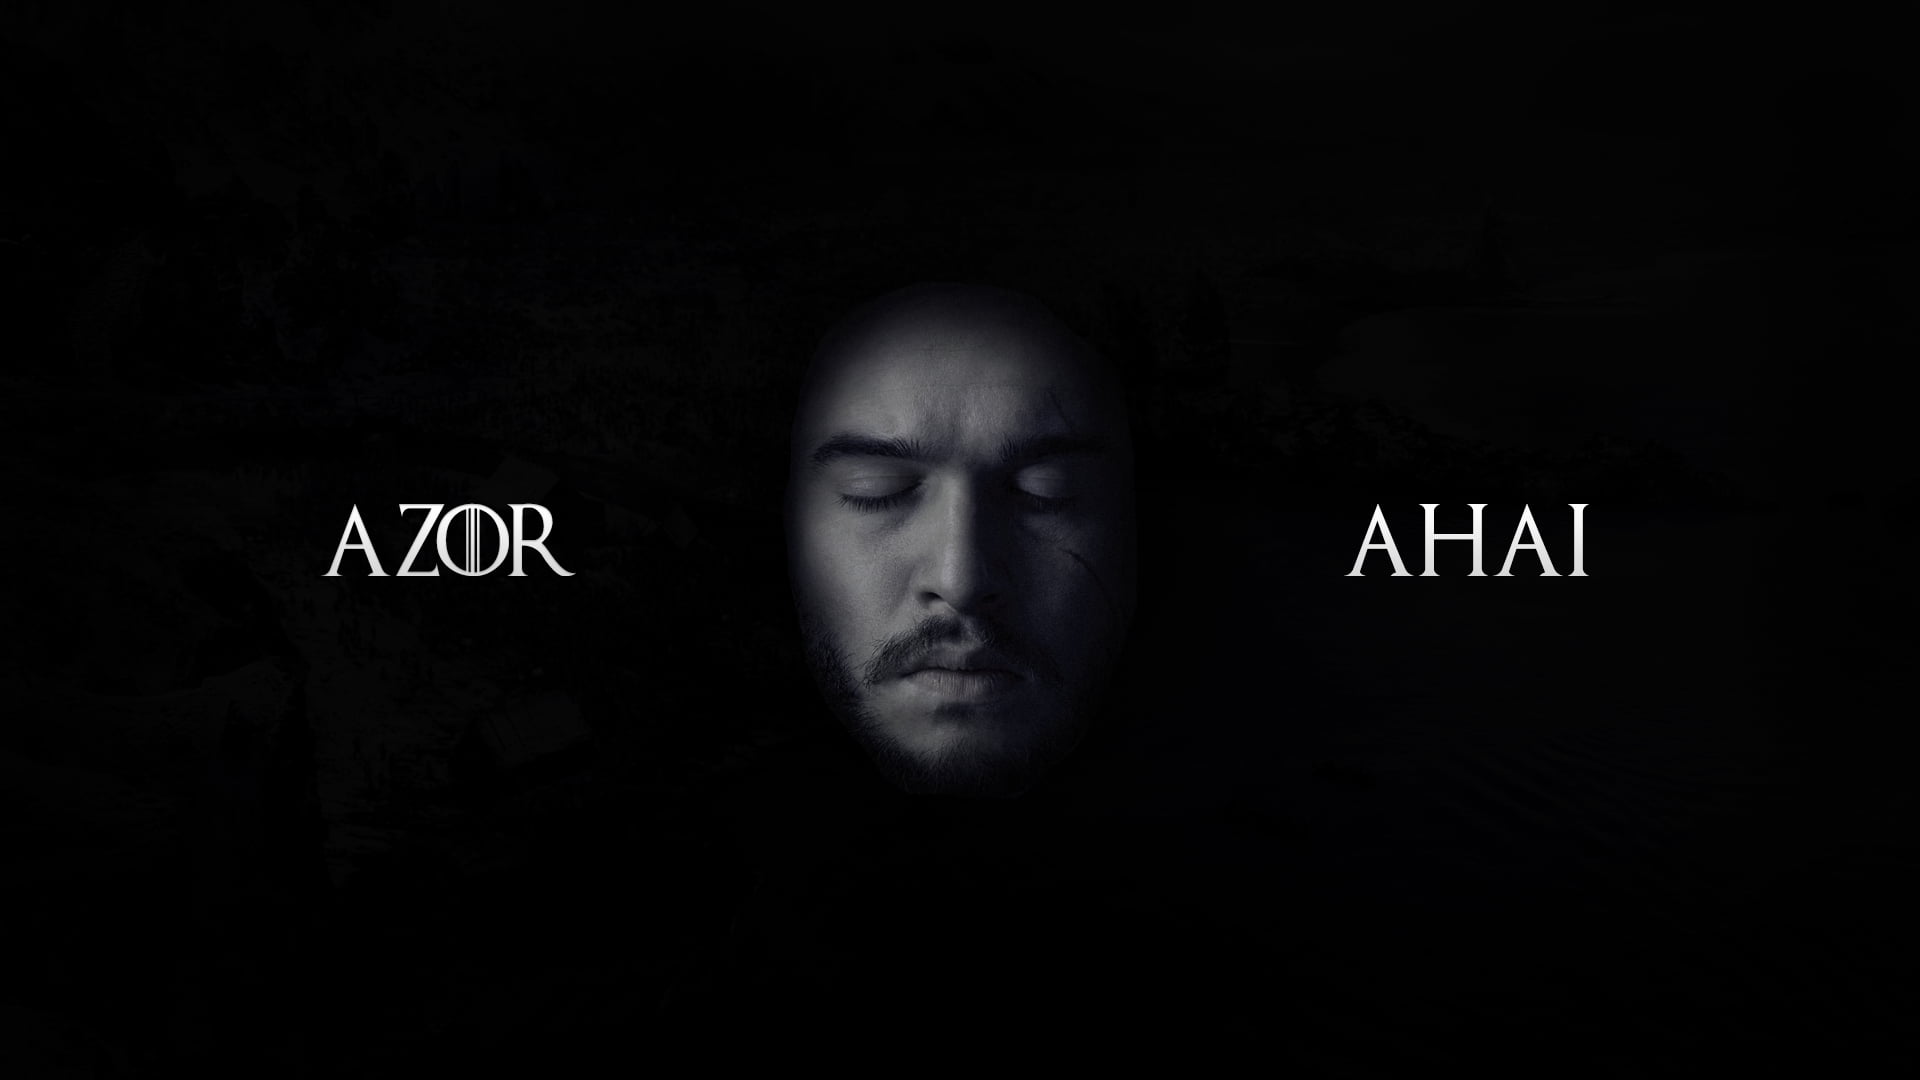 man face with text overlay, Game of Thrones, A Song of Ice and Fire, Azor Ahai, Jon Snow